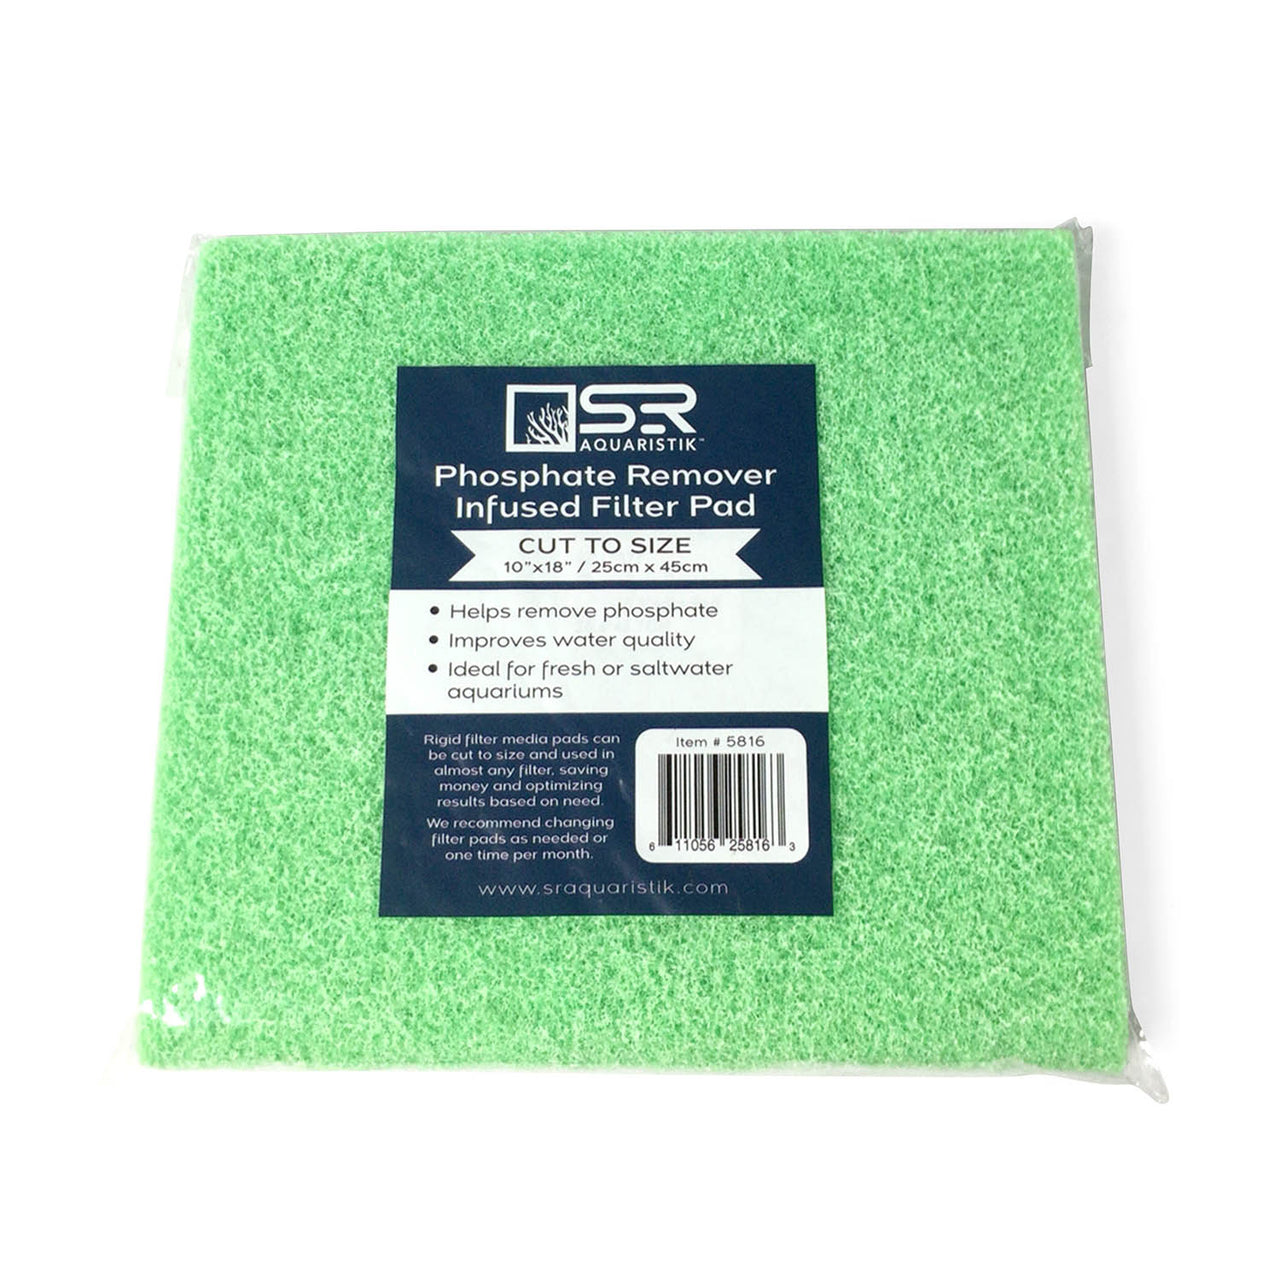 Phosphate Remover Infused Filter Pad